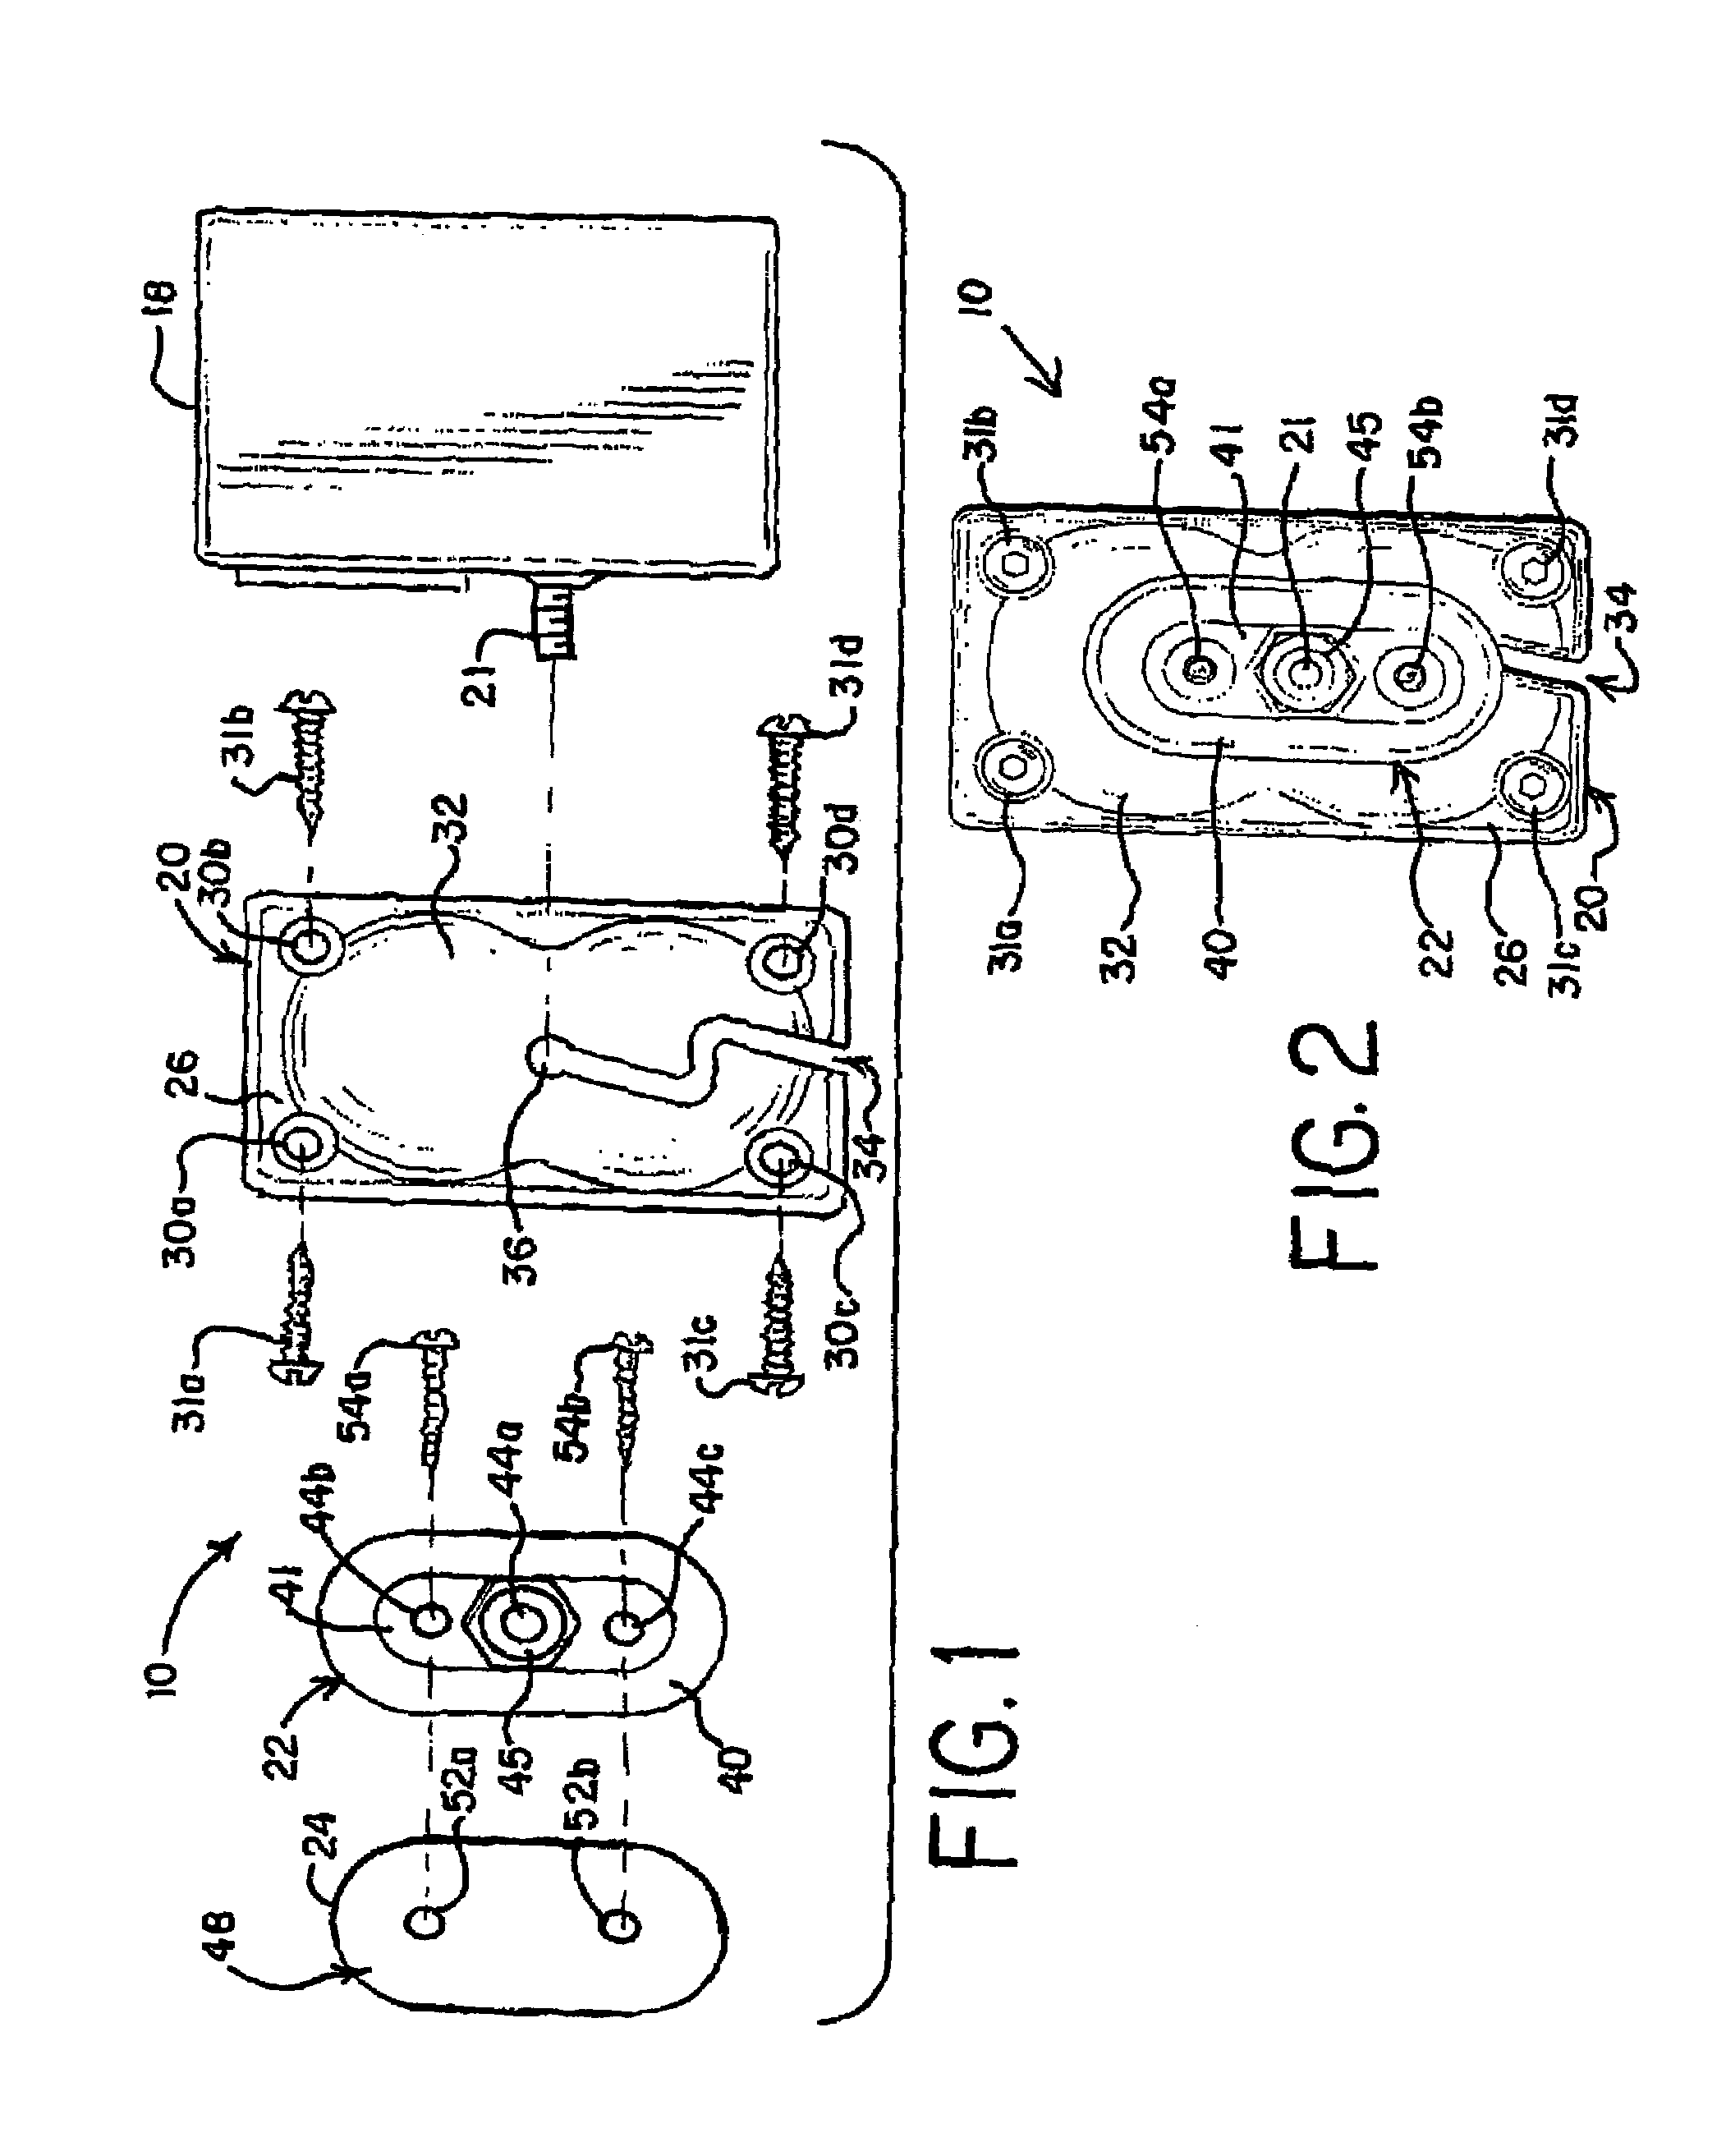 System and method for securing and/or for aligning a device